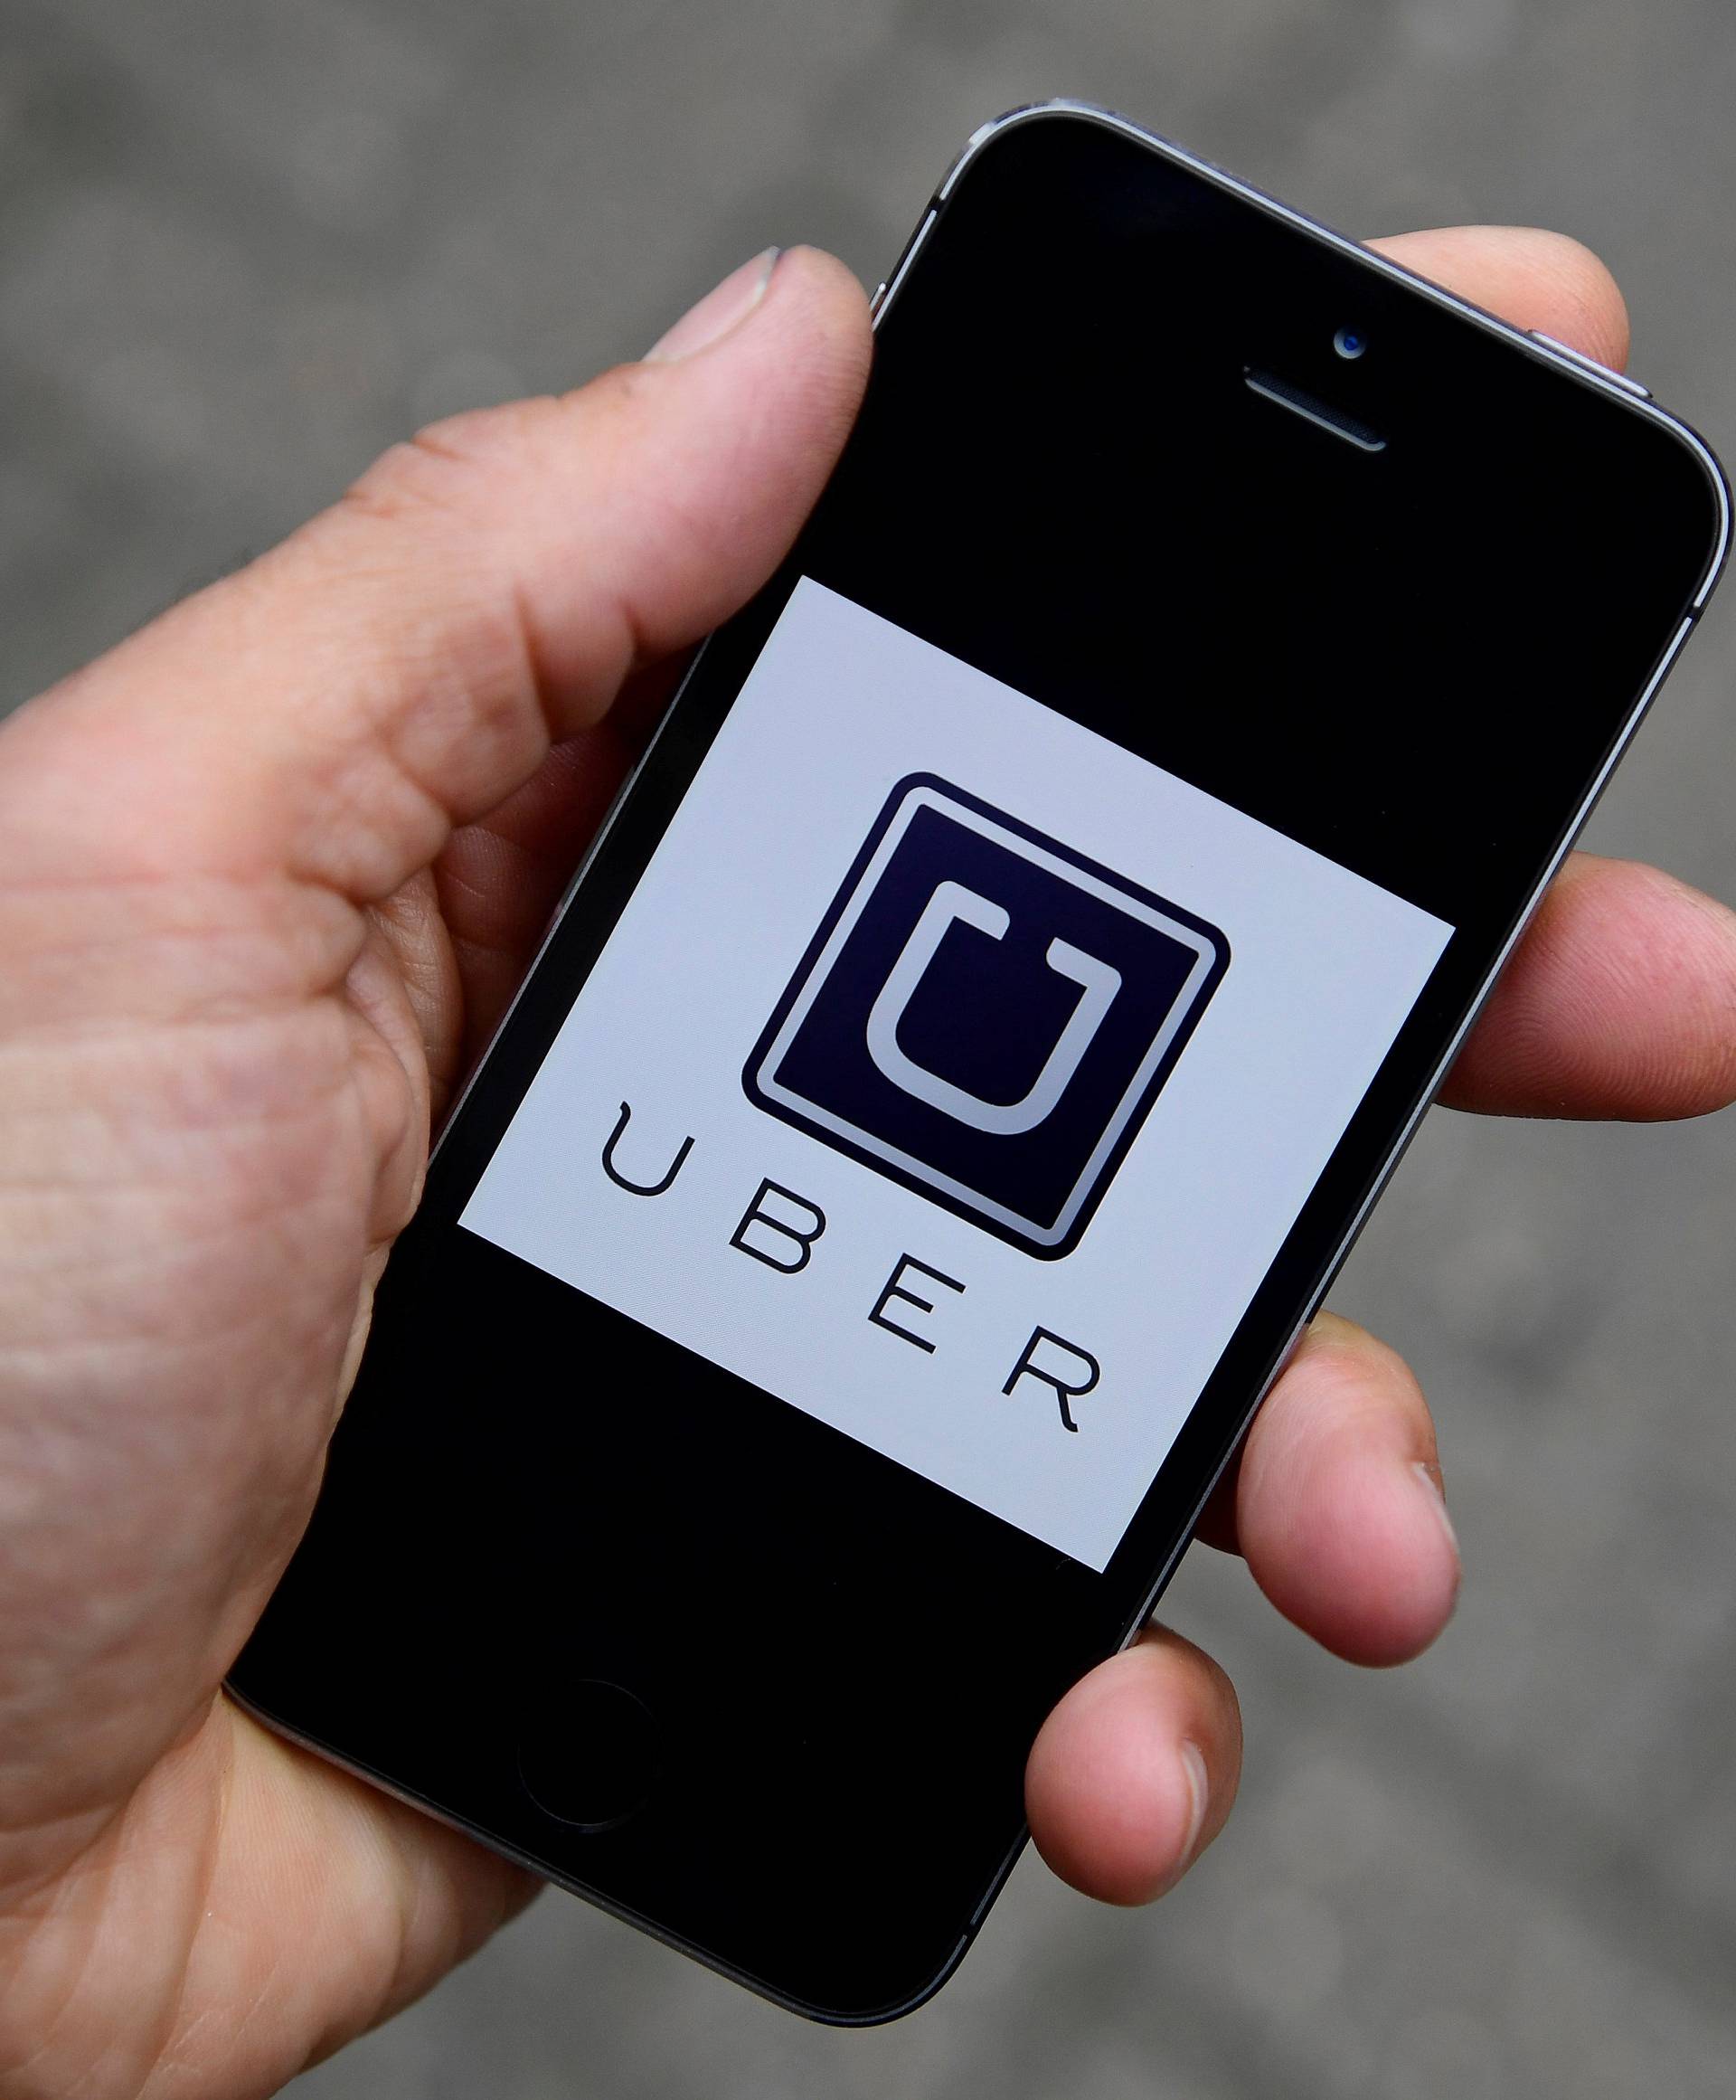 FILE PHOTO: The Uber app logo is seen on a mobile telephone